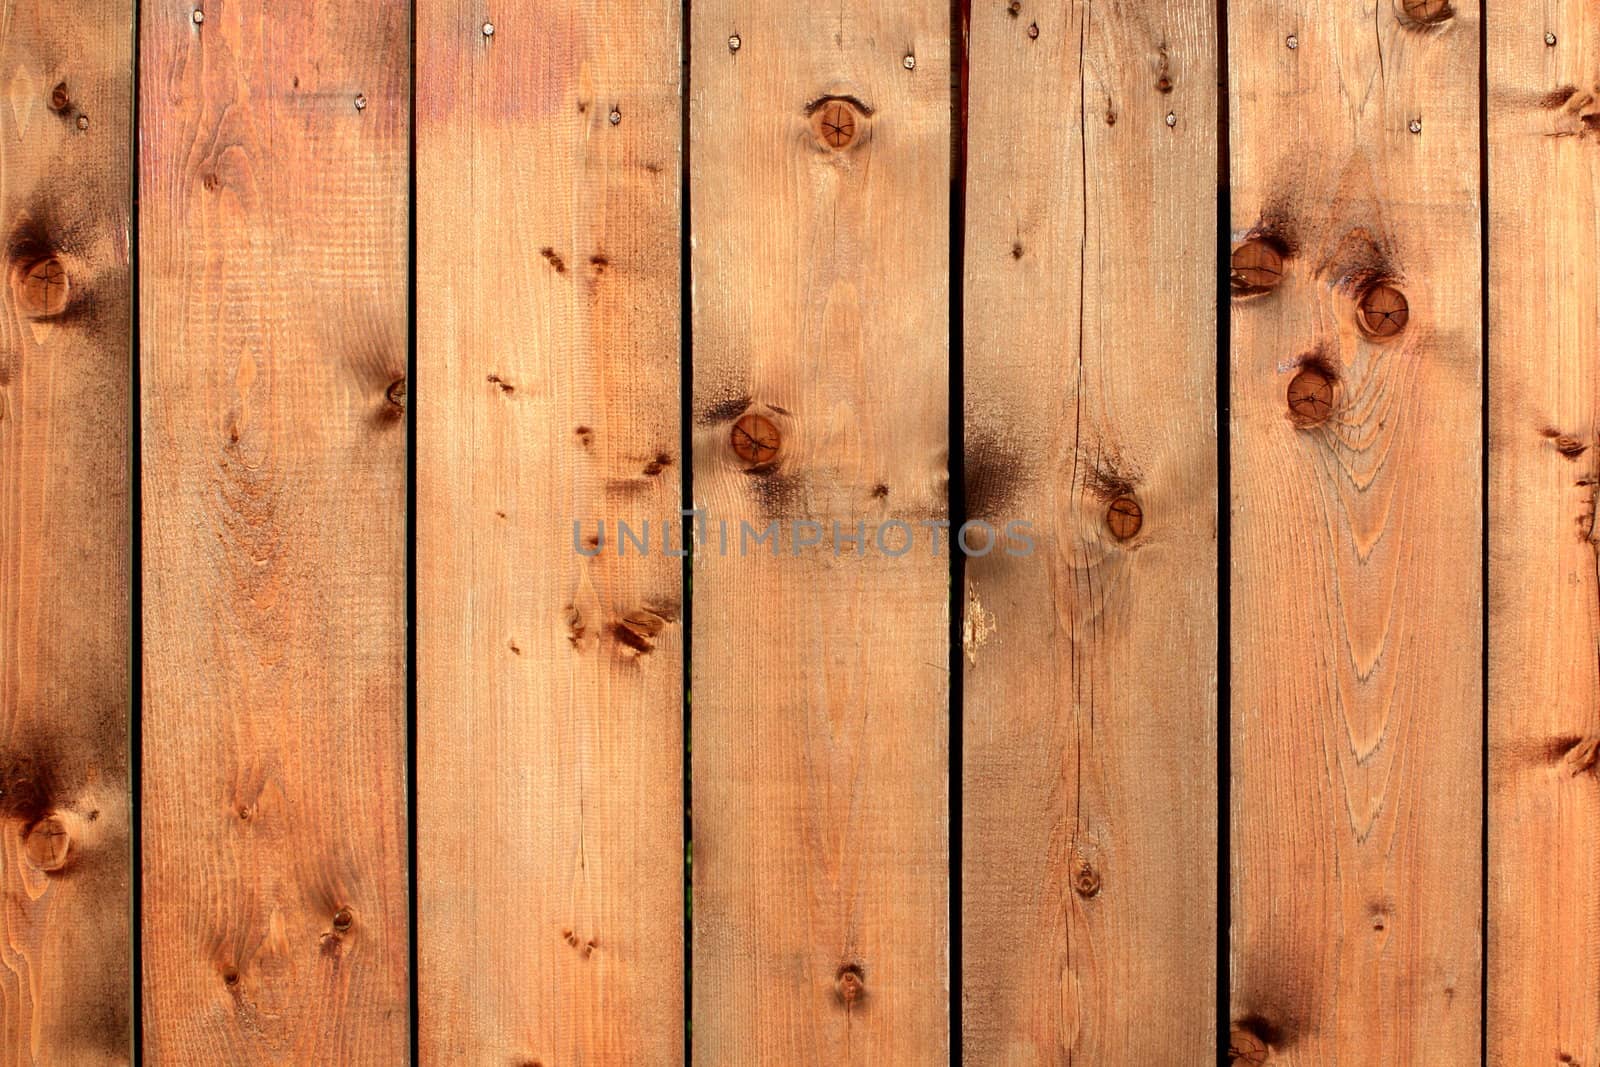 textured wooden planks laid together